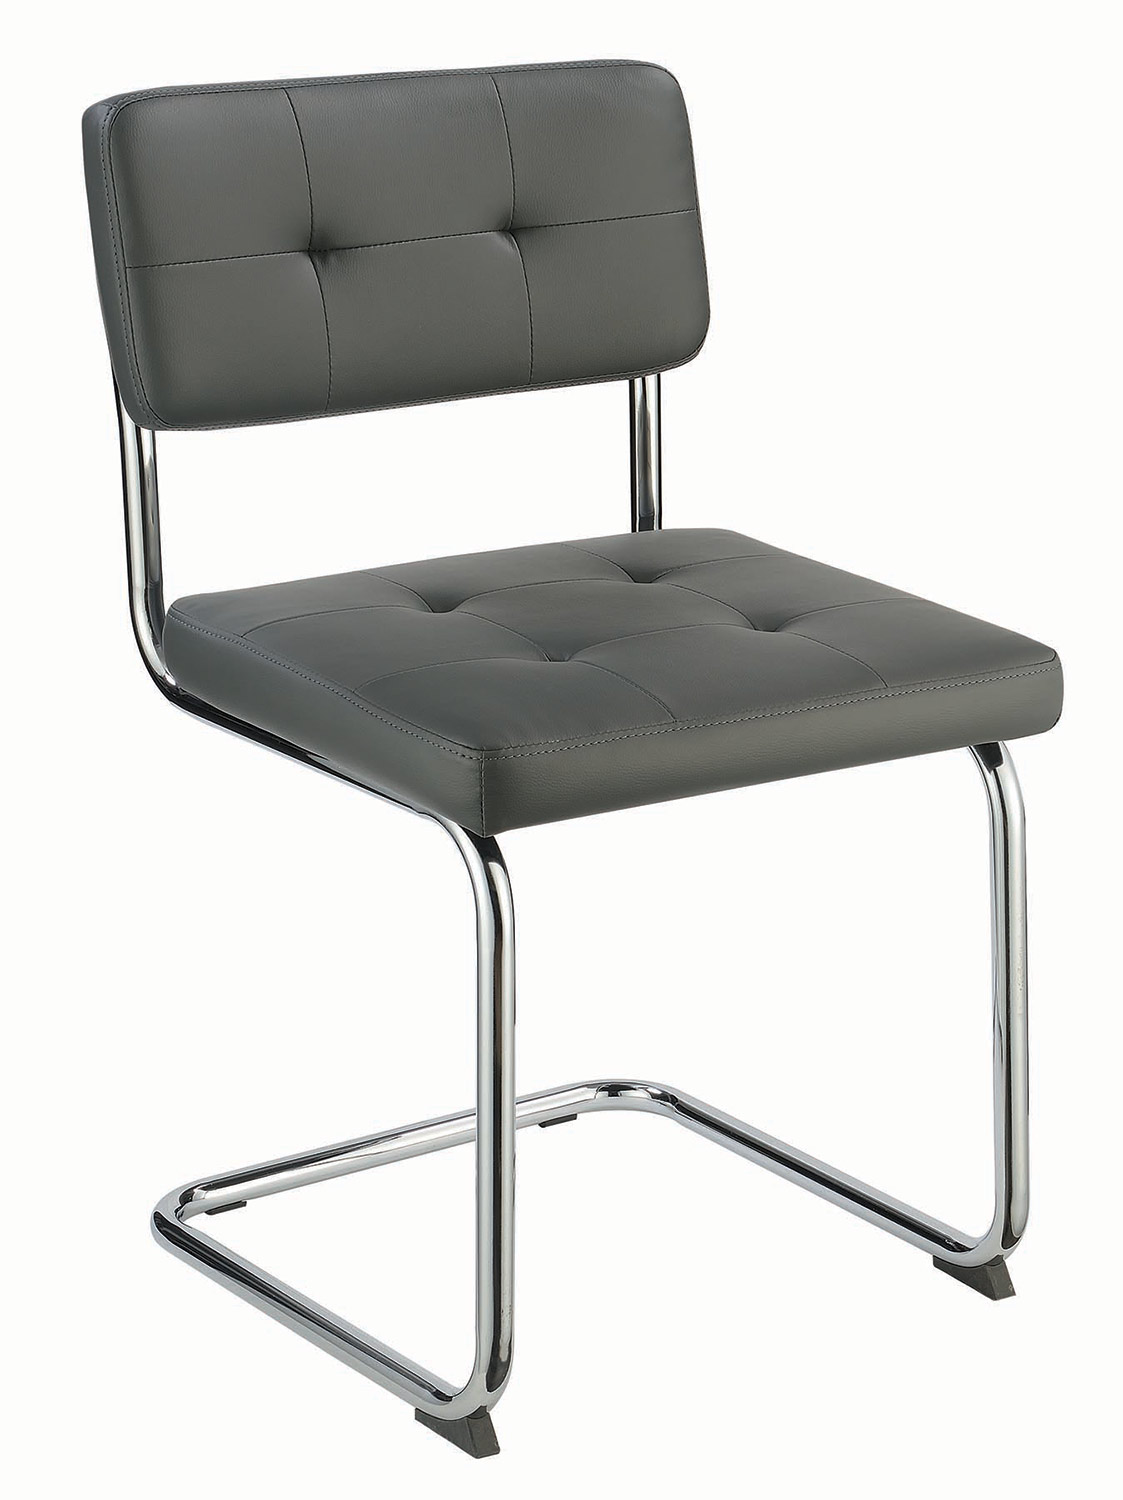 Coaster Walsh Dining Side Chair - Grey Leatherette